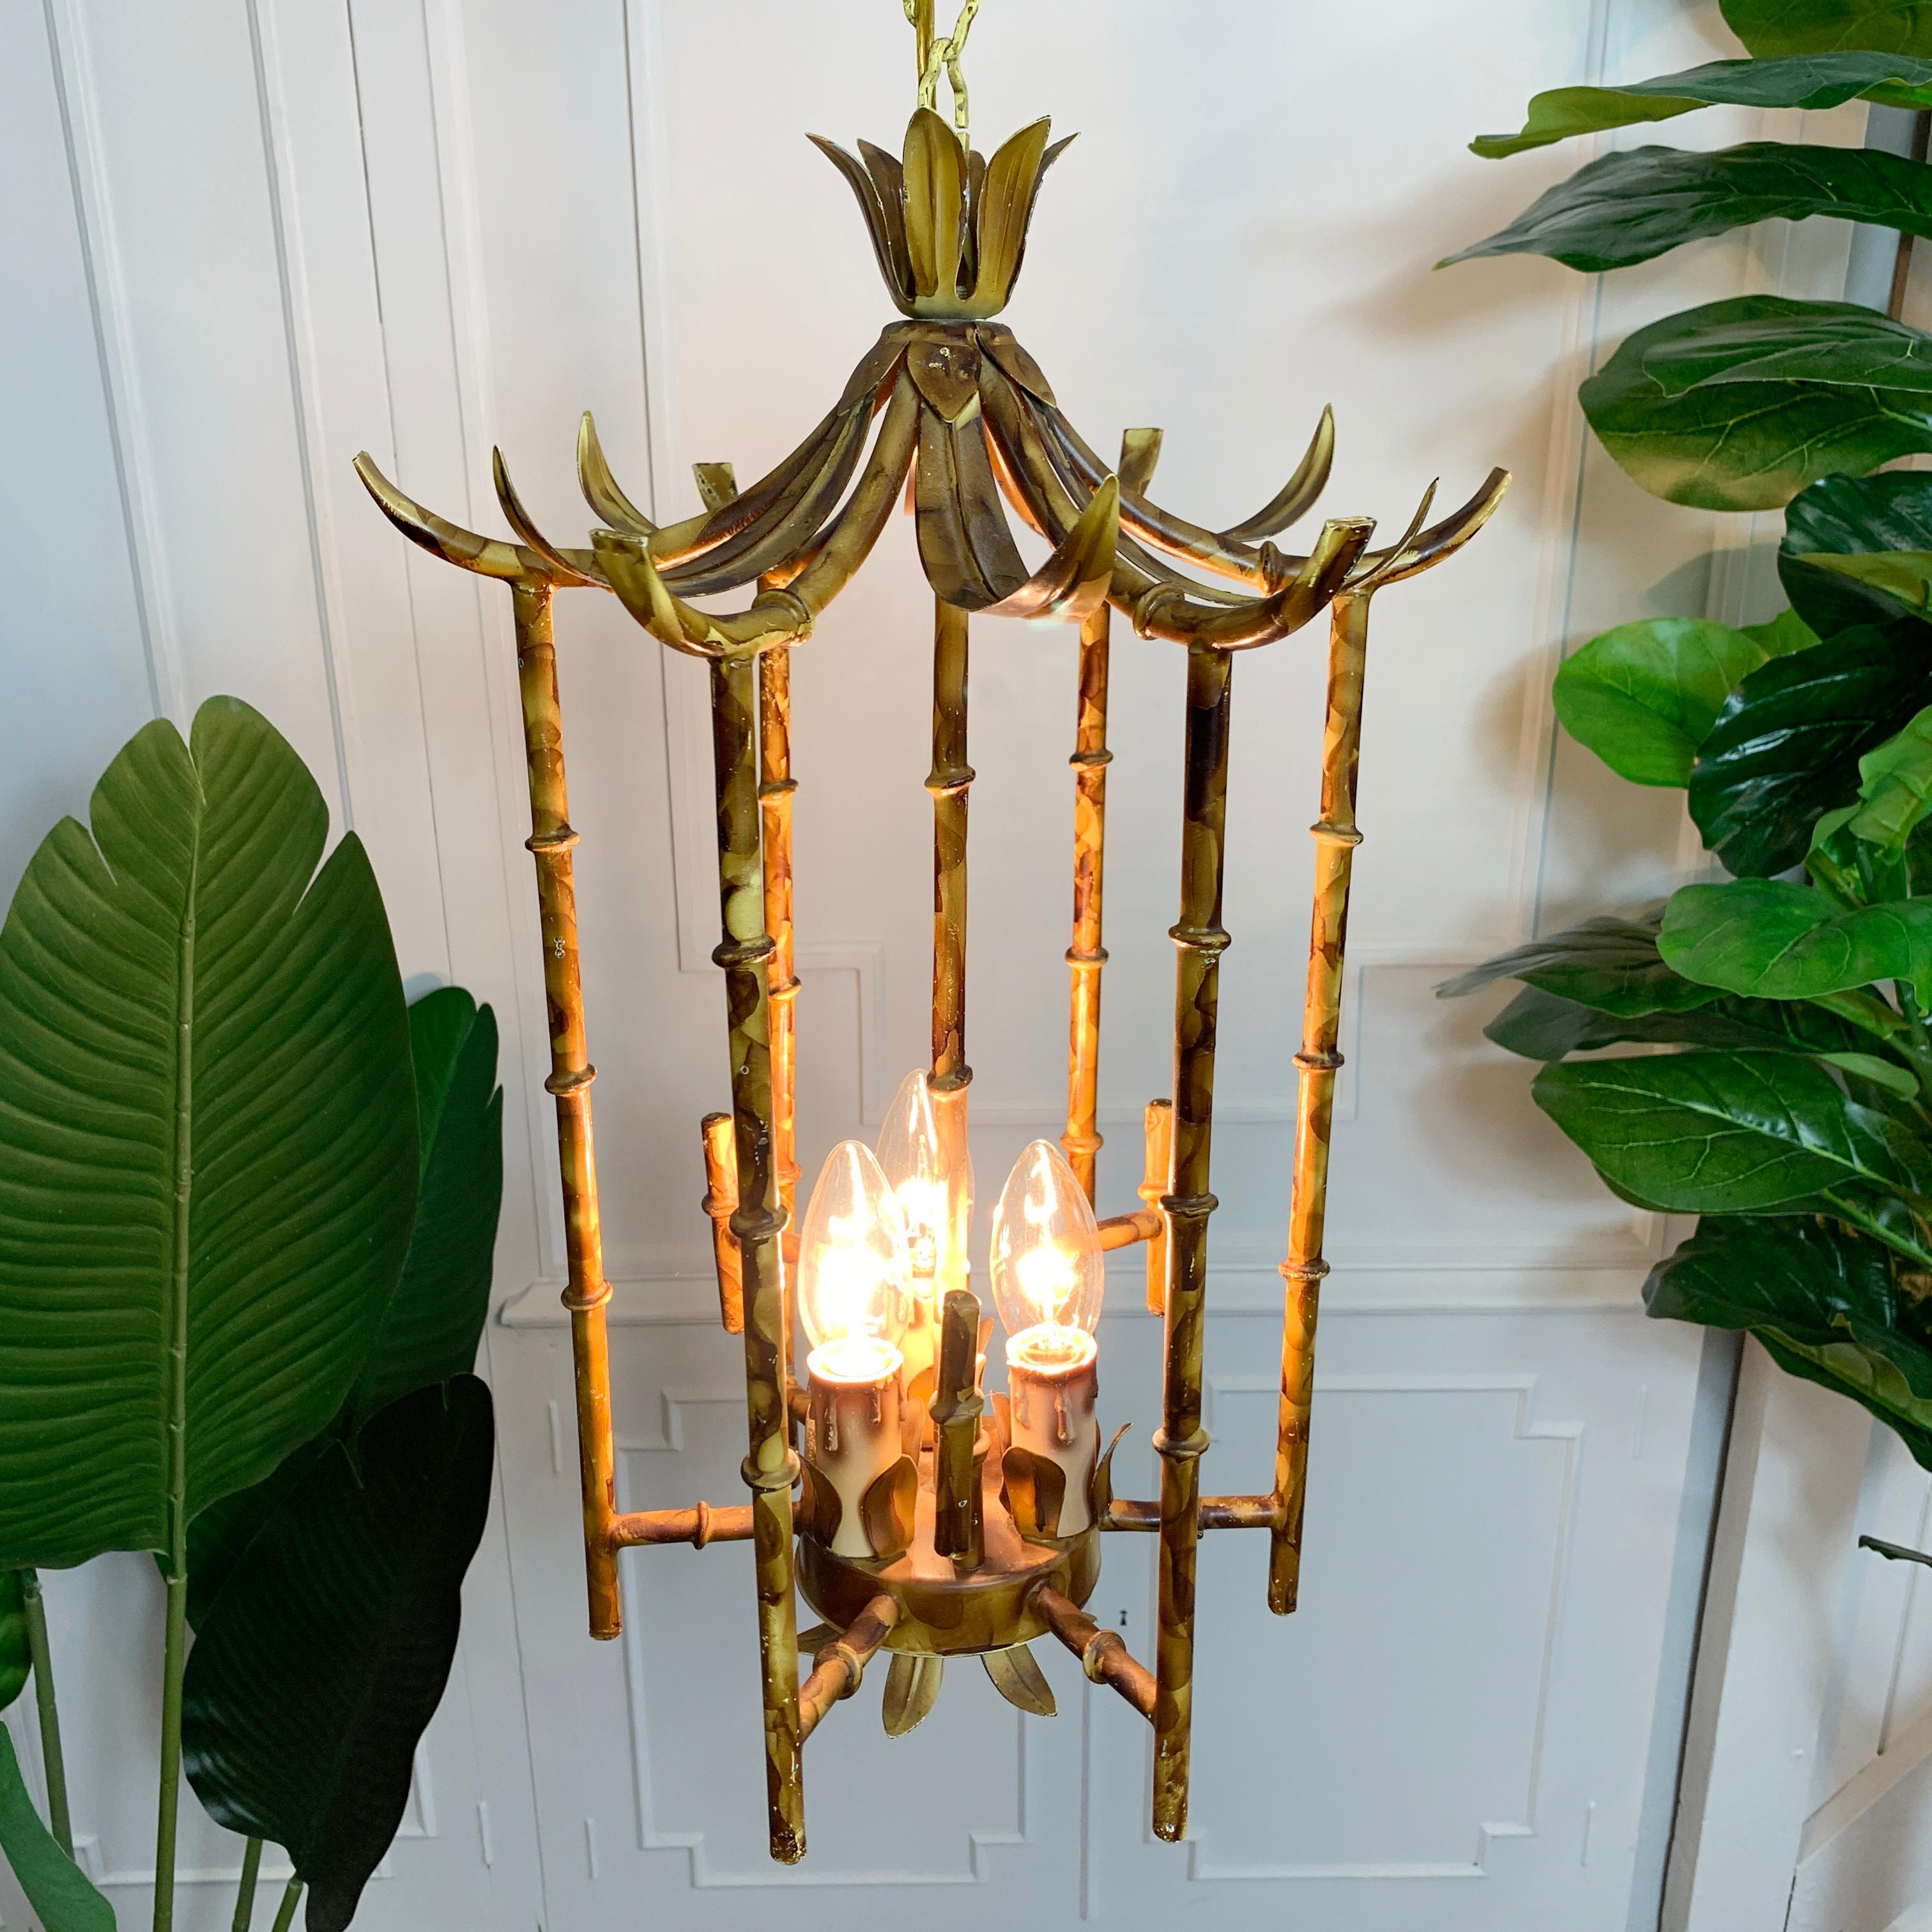 Mid-20th Century Tortoiseshell Painted Metal Faux Bamboo Pagoda Chandelier